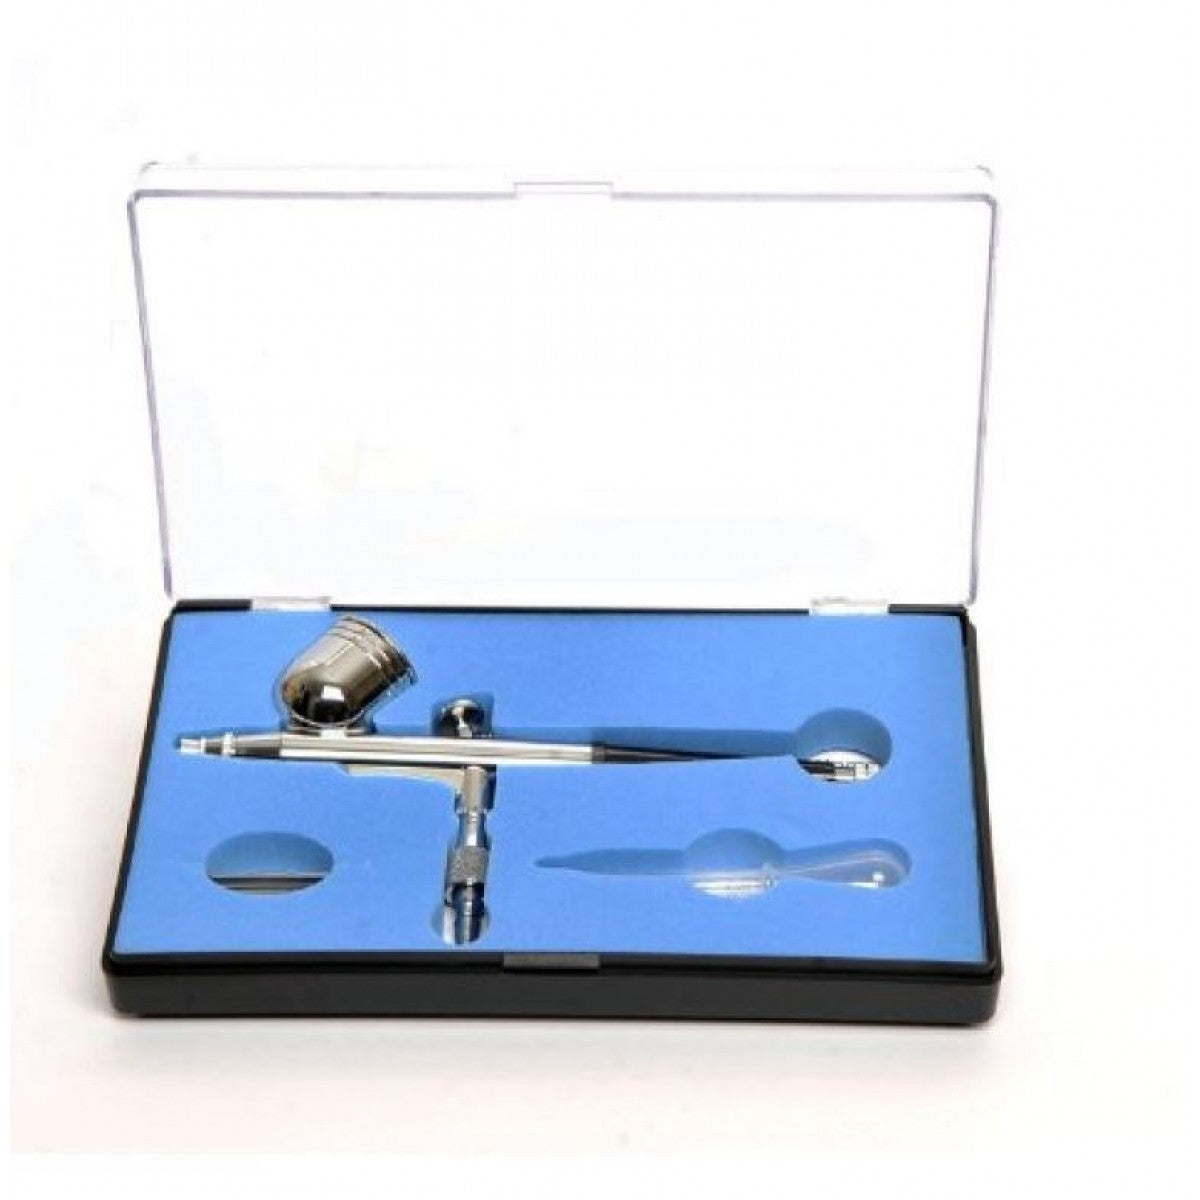 Hseng HS-30 0.3mm dual action gravity feed airbrush in a protective case, featuring chrome-plated metal body and accessories.